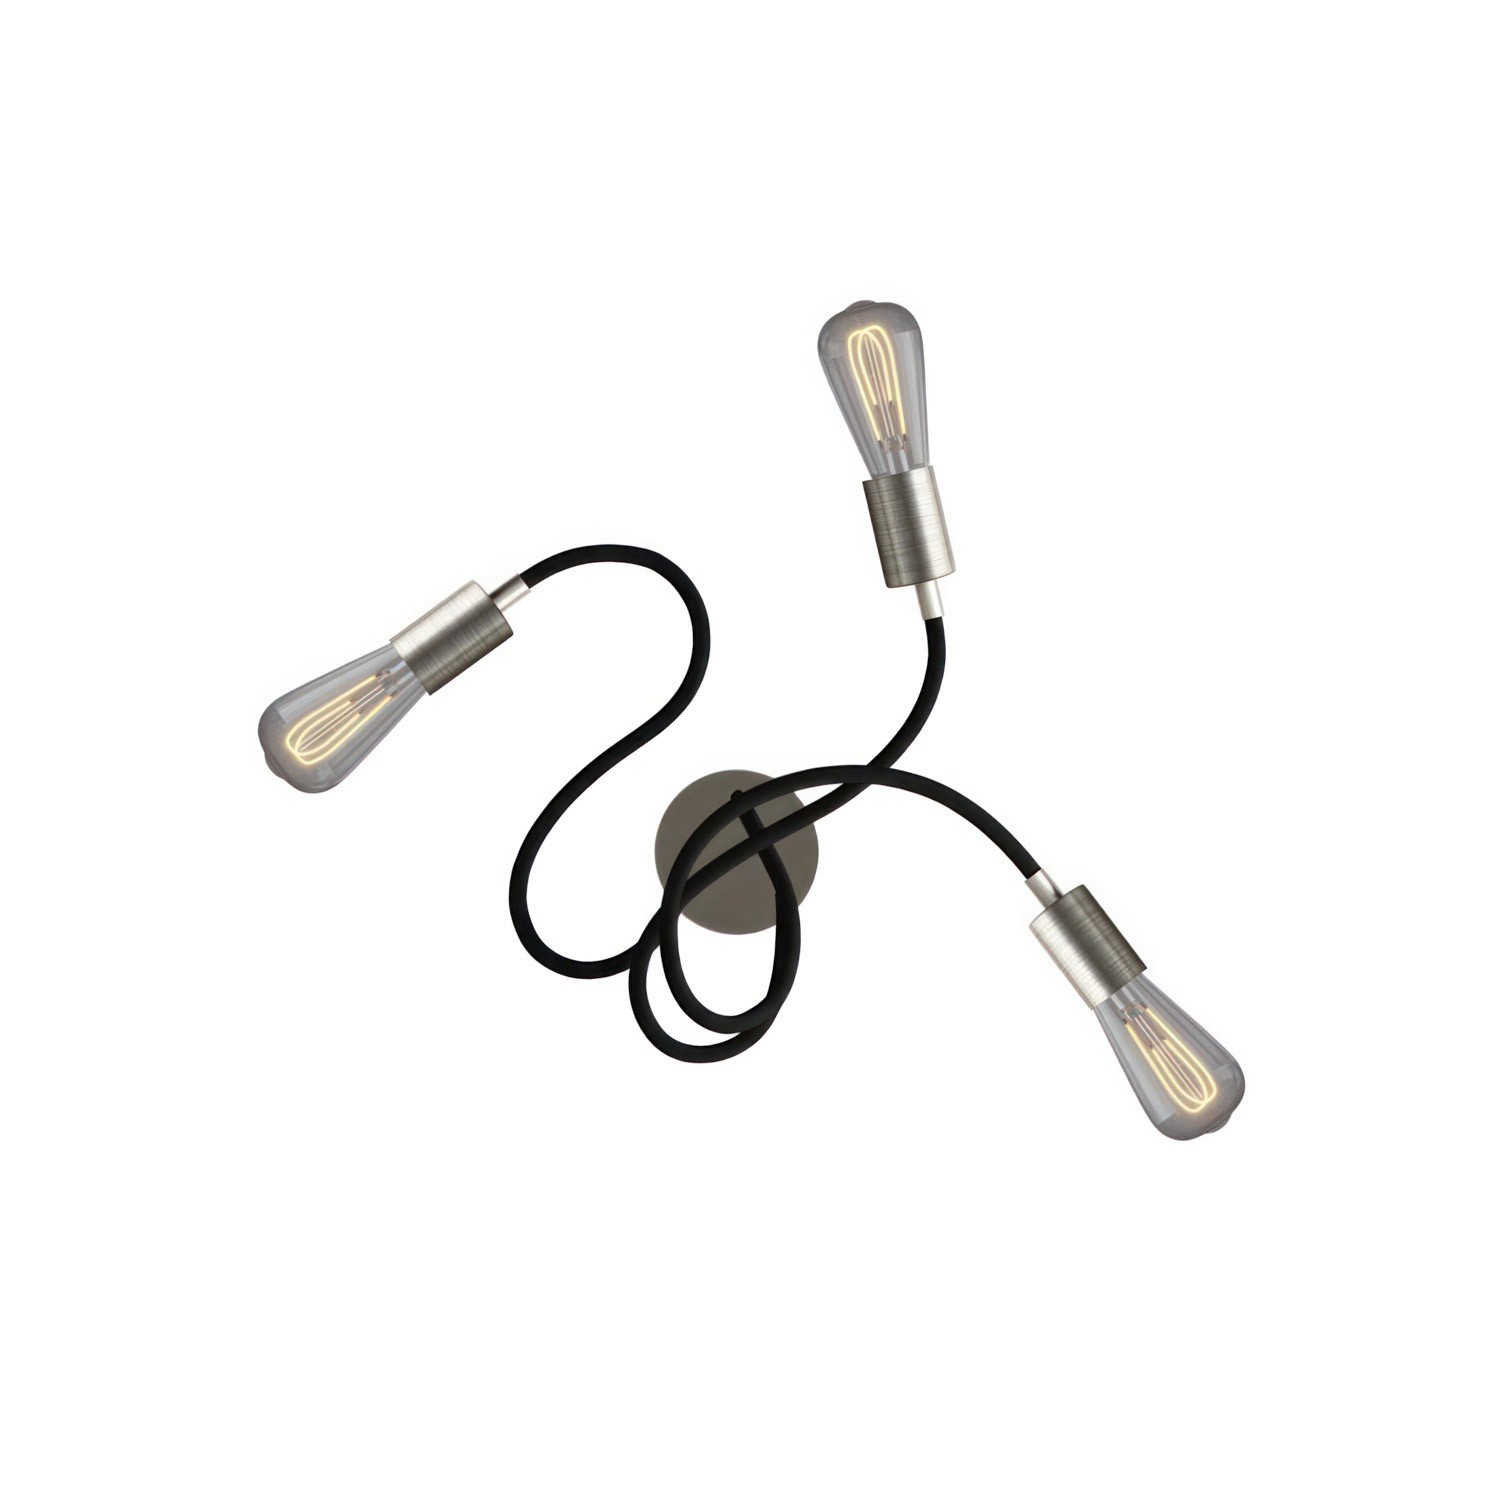 Flex 60 wall or ceiling lamp flexible provides diffused light with LED ST64 light bulb